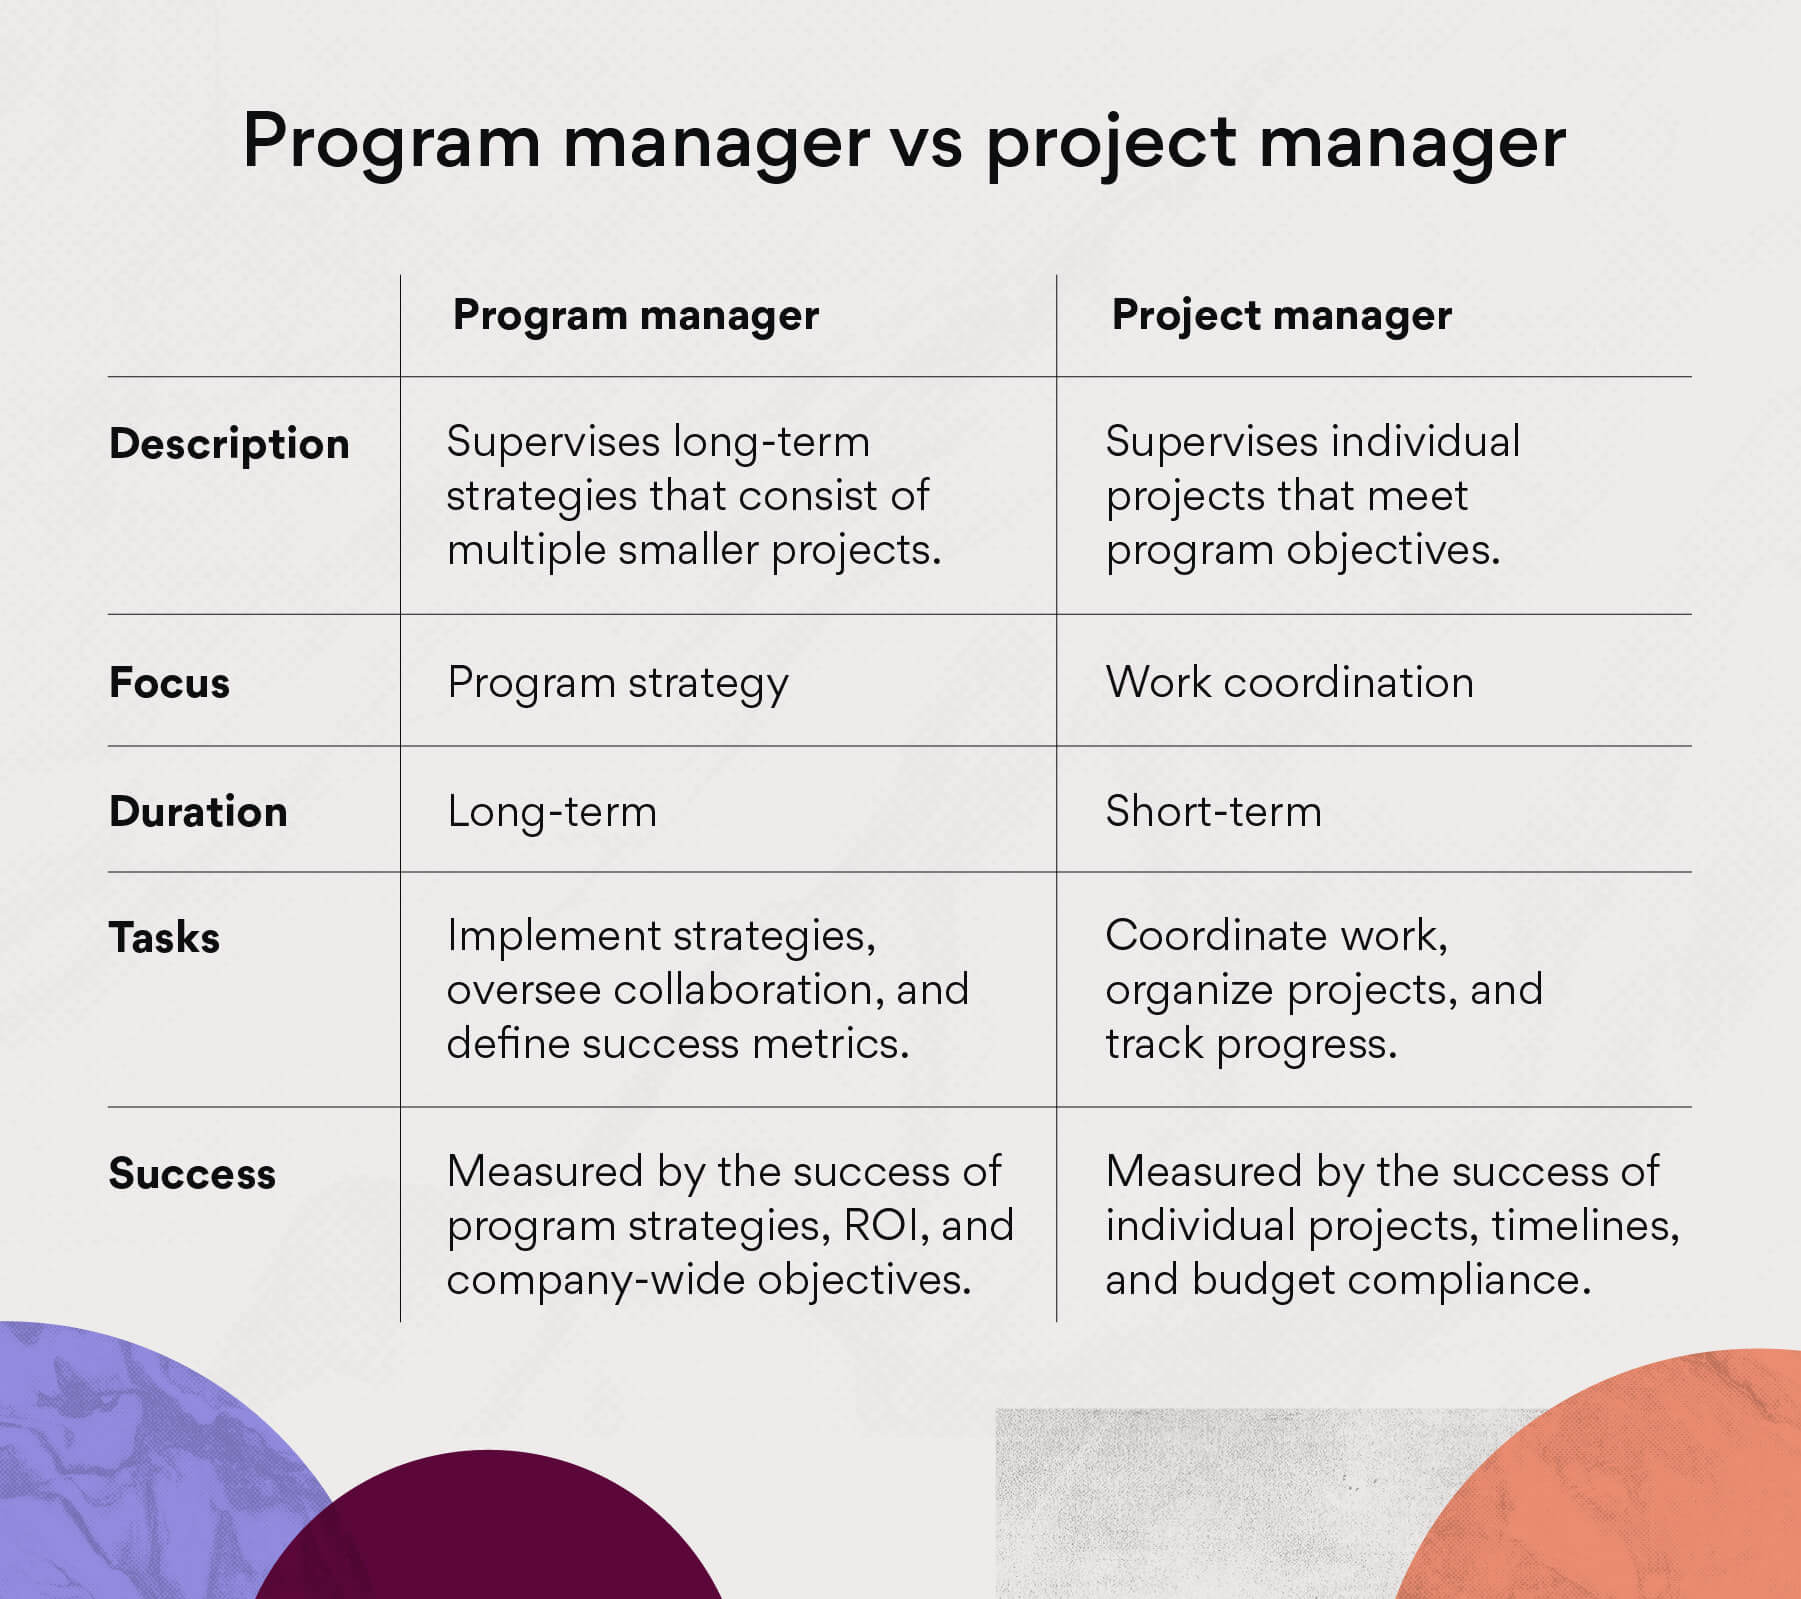 Program manager vs. project manager